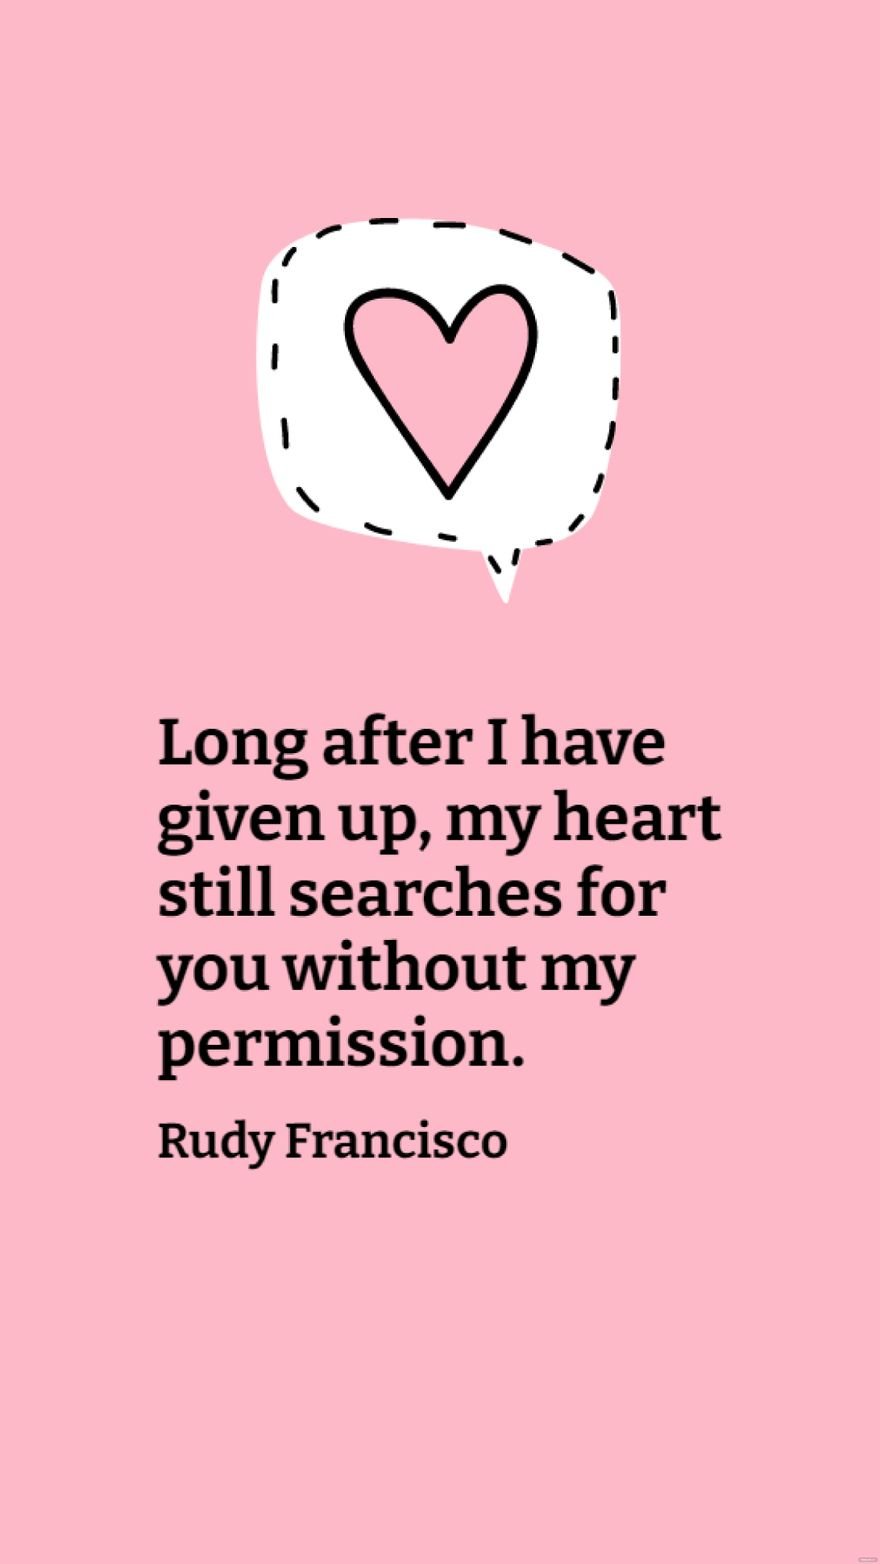 Free Rudy Francisco - Long after I have given up, my heart still searches for you without my permission.